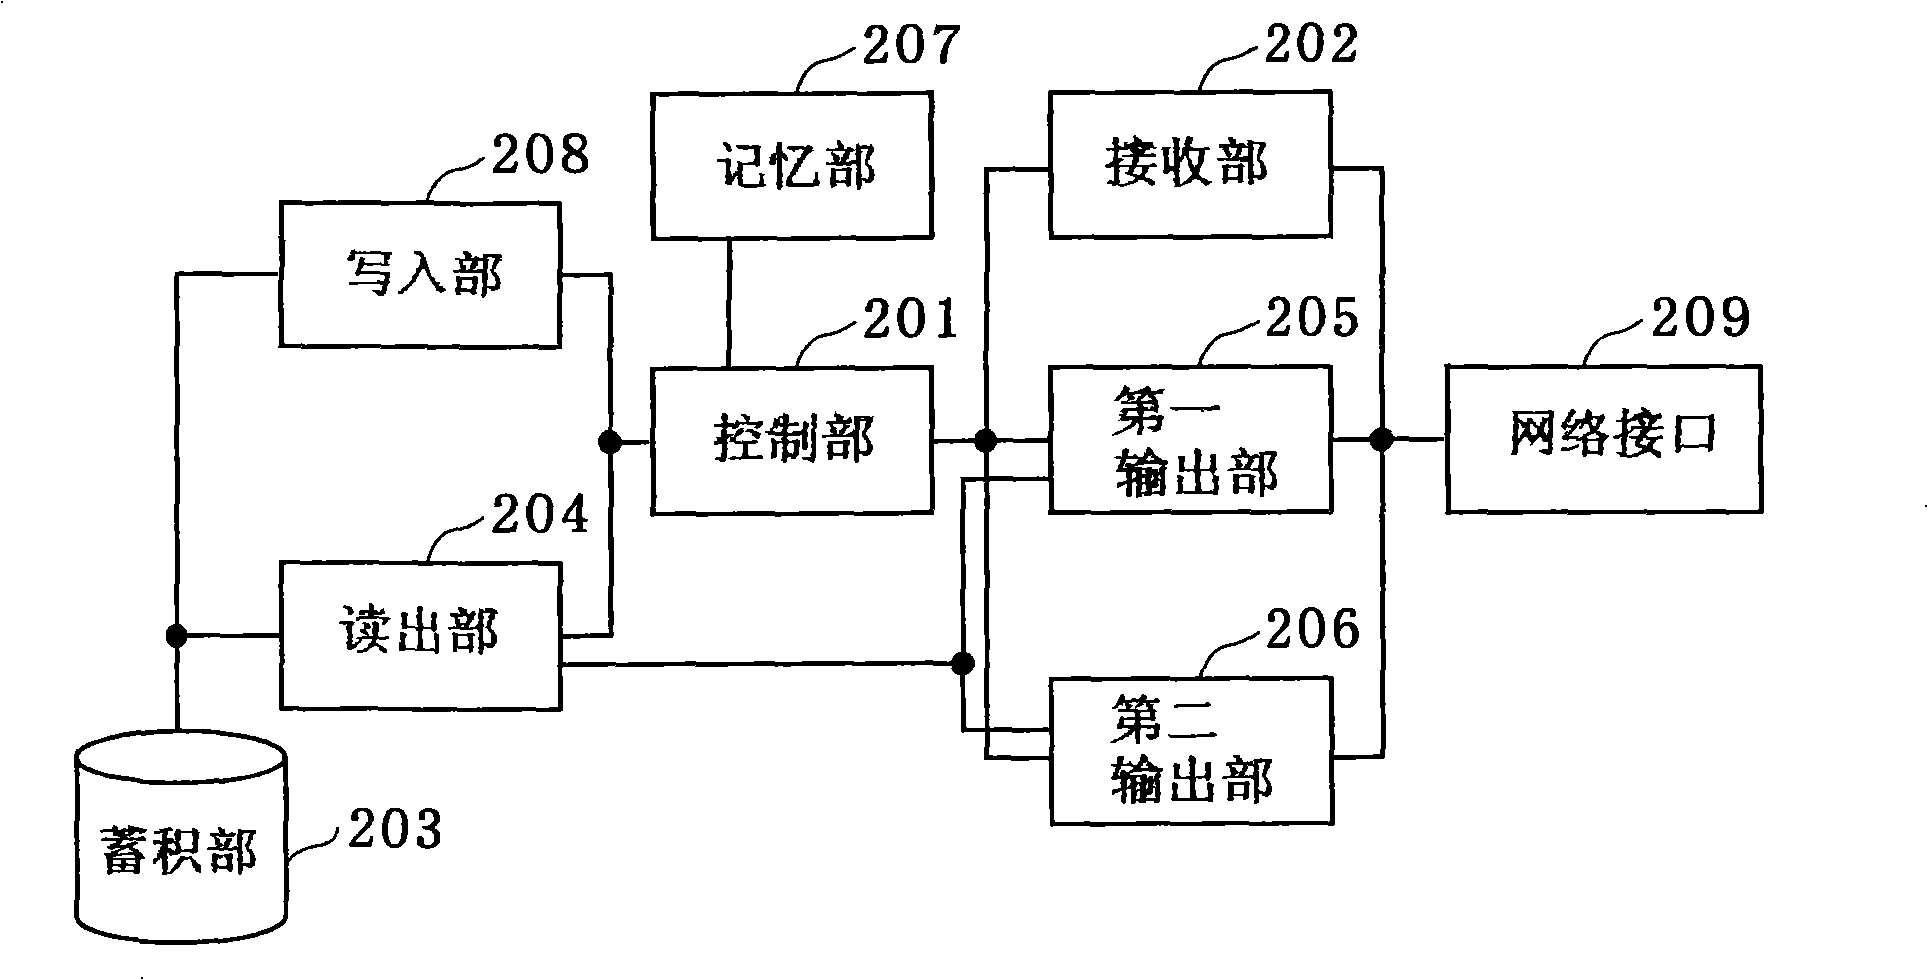 Data output device, equipment control device, and multimedia delivery system